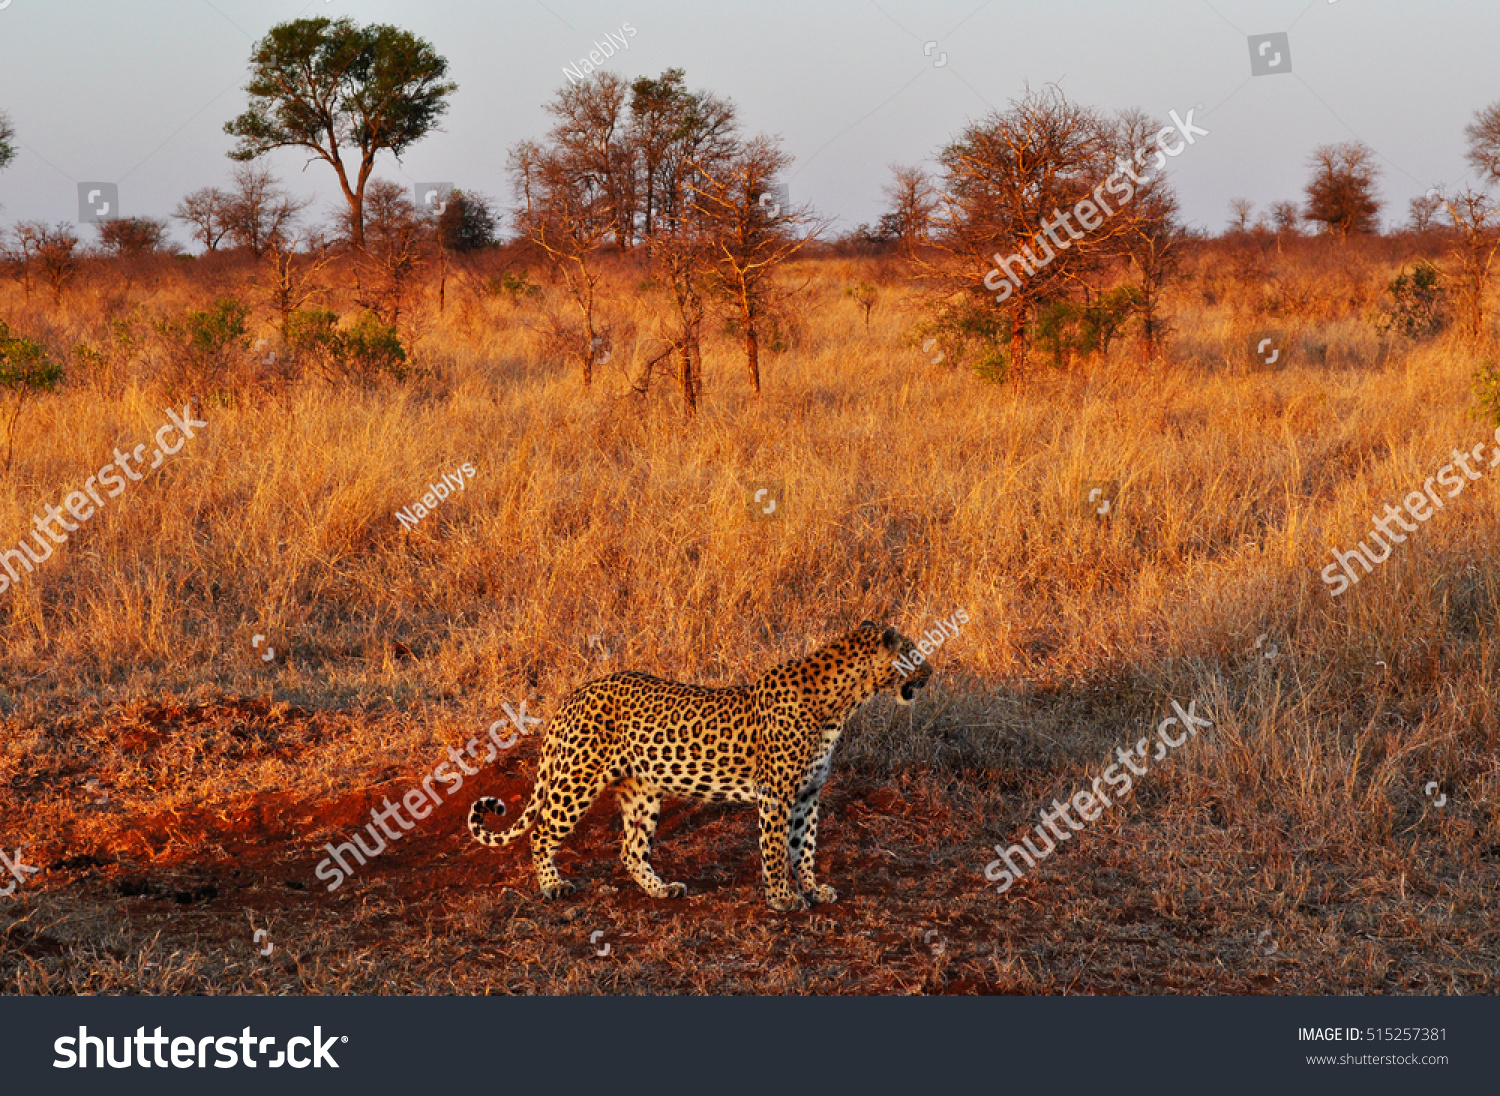 Safari in South Africa, 09/28/2009: african leopard at sunset in a grassland of Kruger National Park, one of the largest game reserves in Africa since 1898, South Africa's first national park in 1926 #515257381